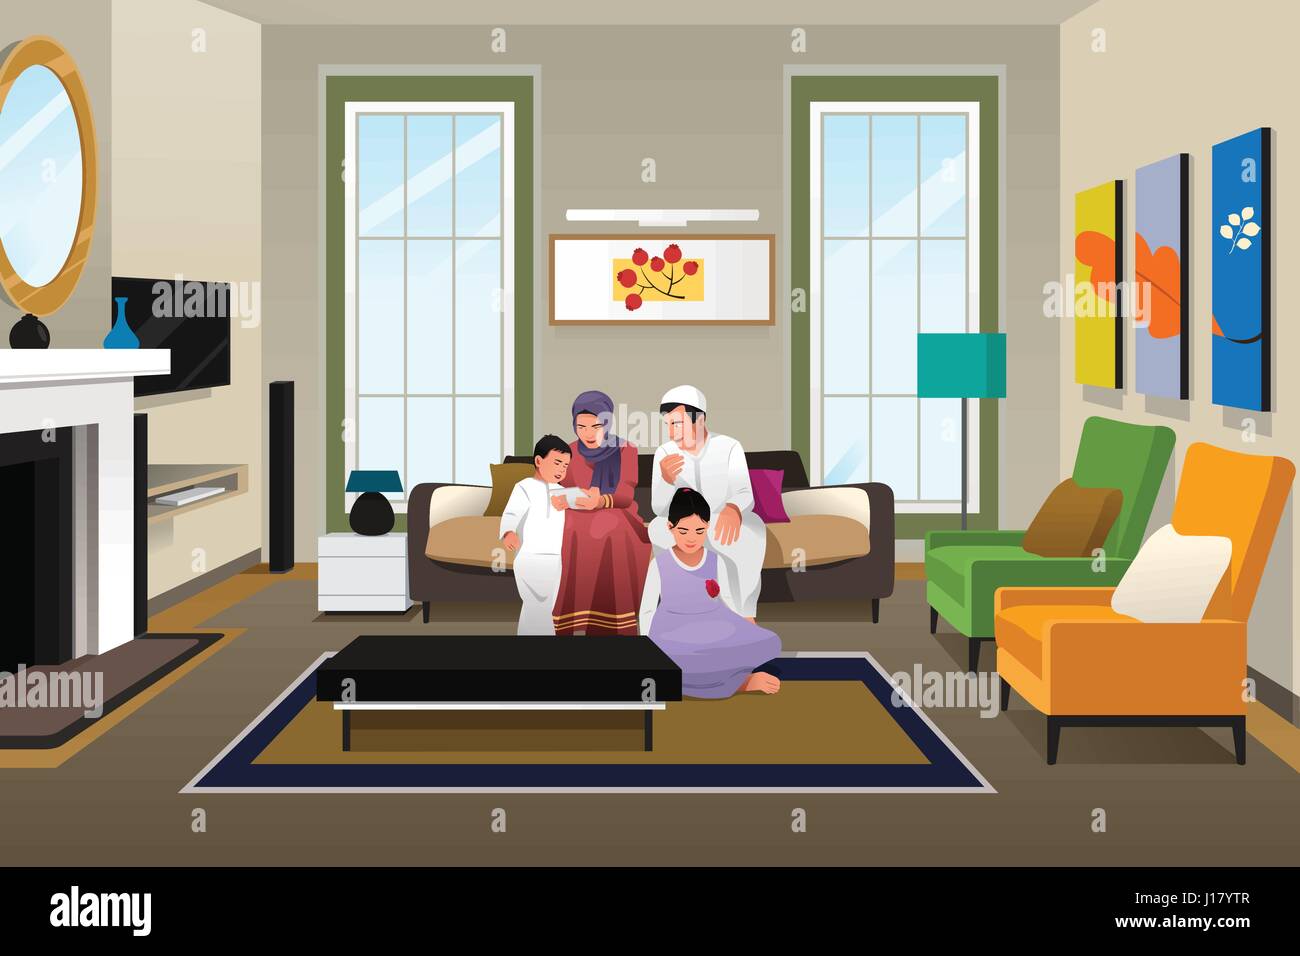 A vector illustration of Happy Muslim Family at Home Stock Vector